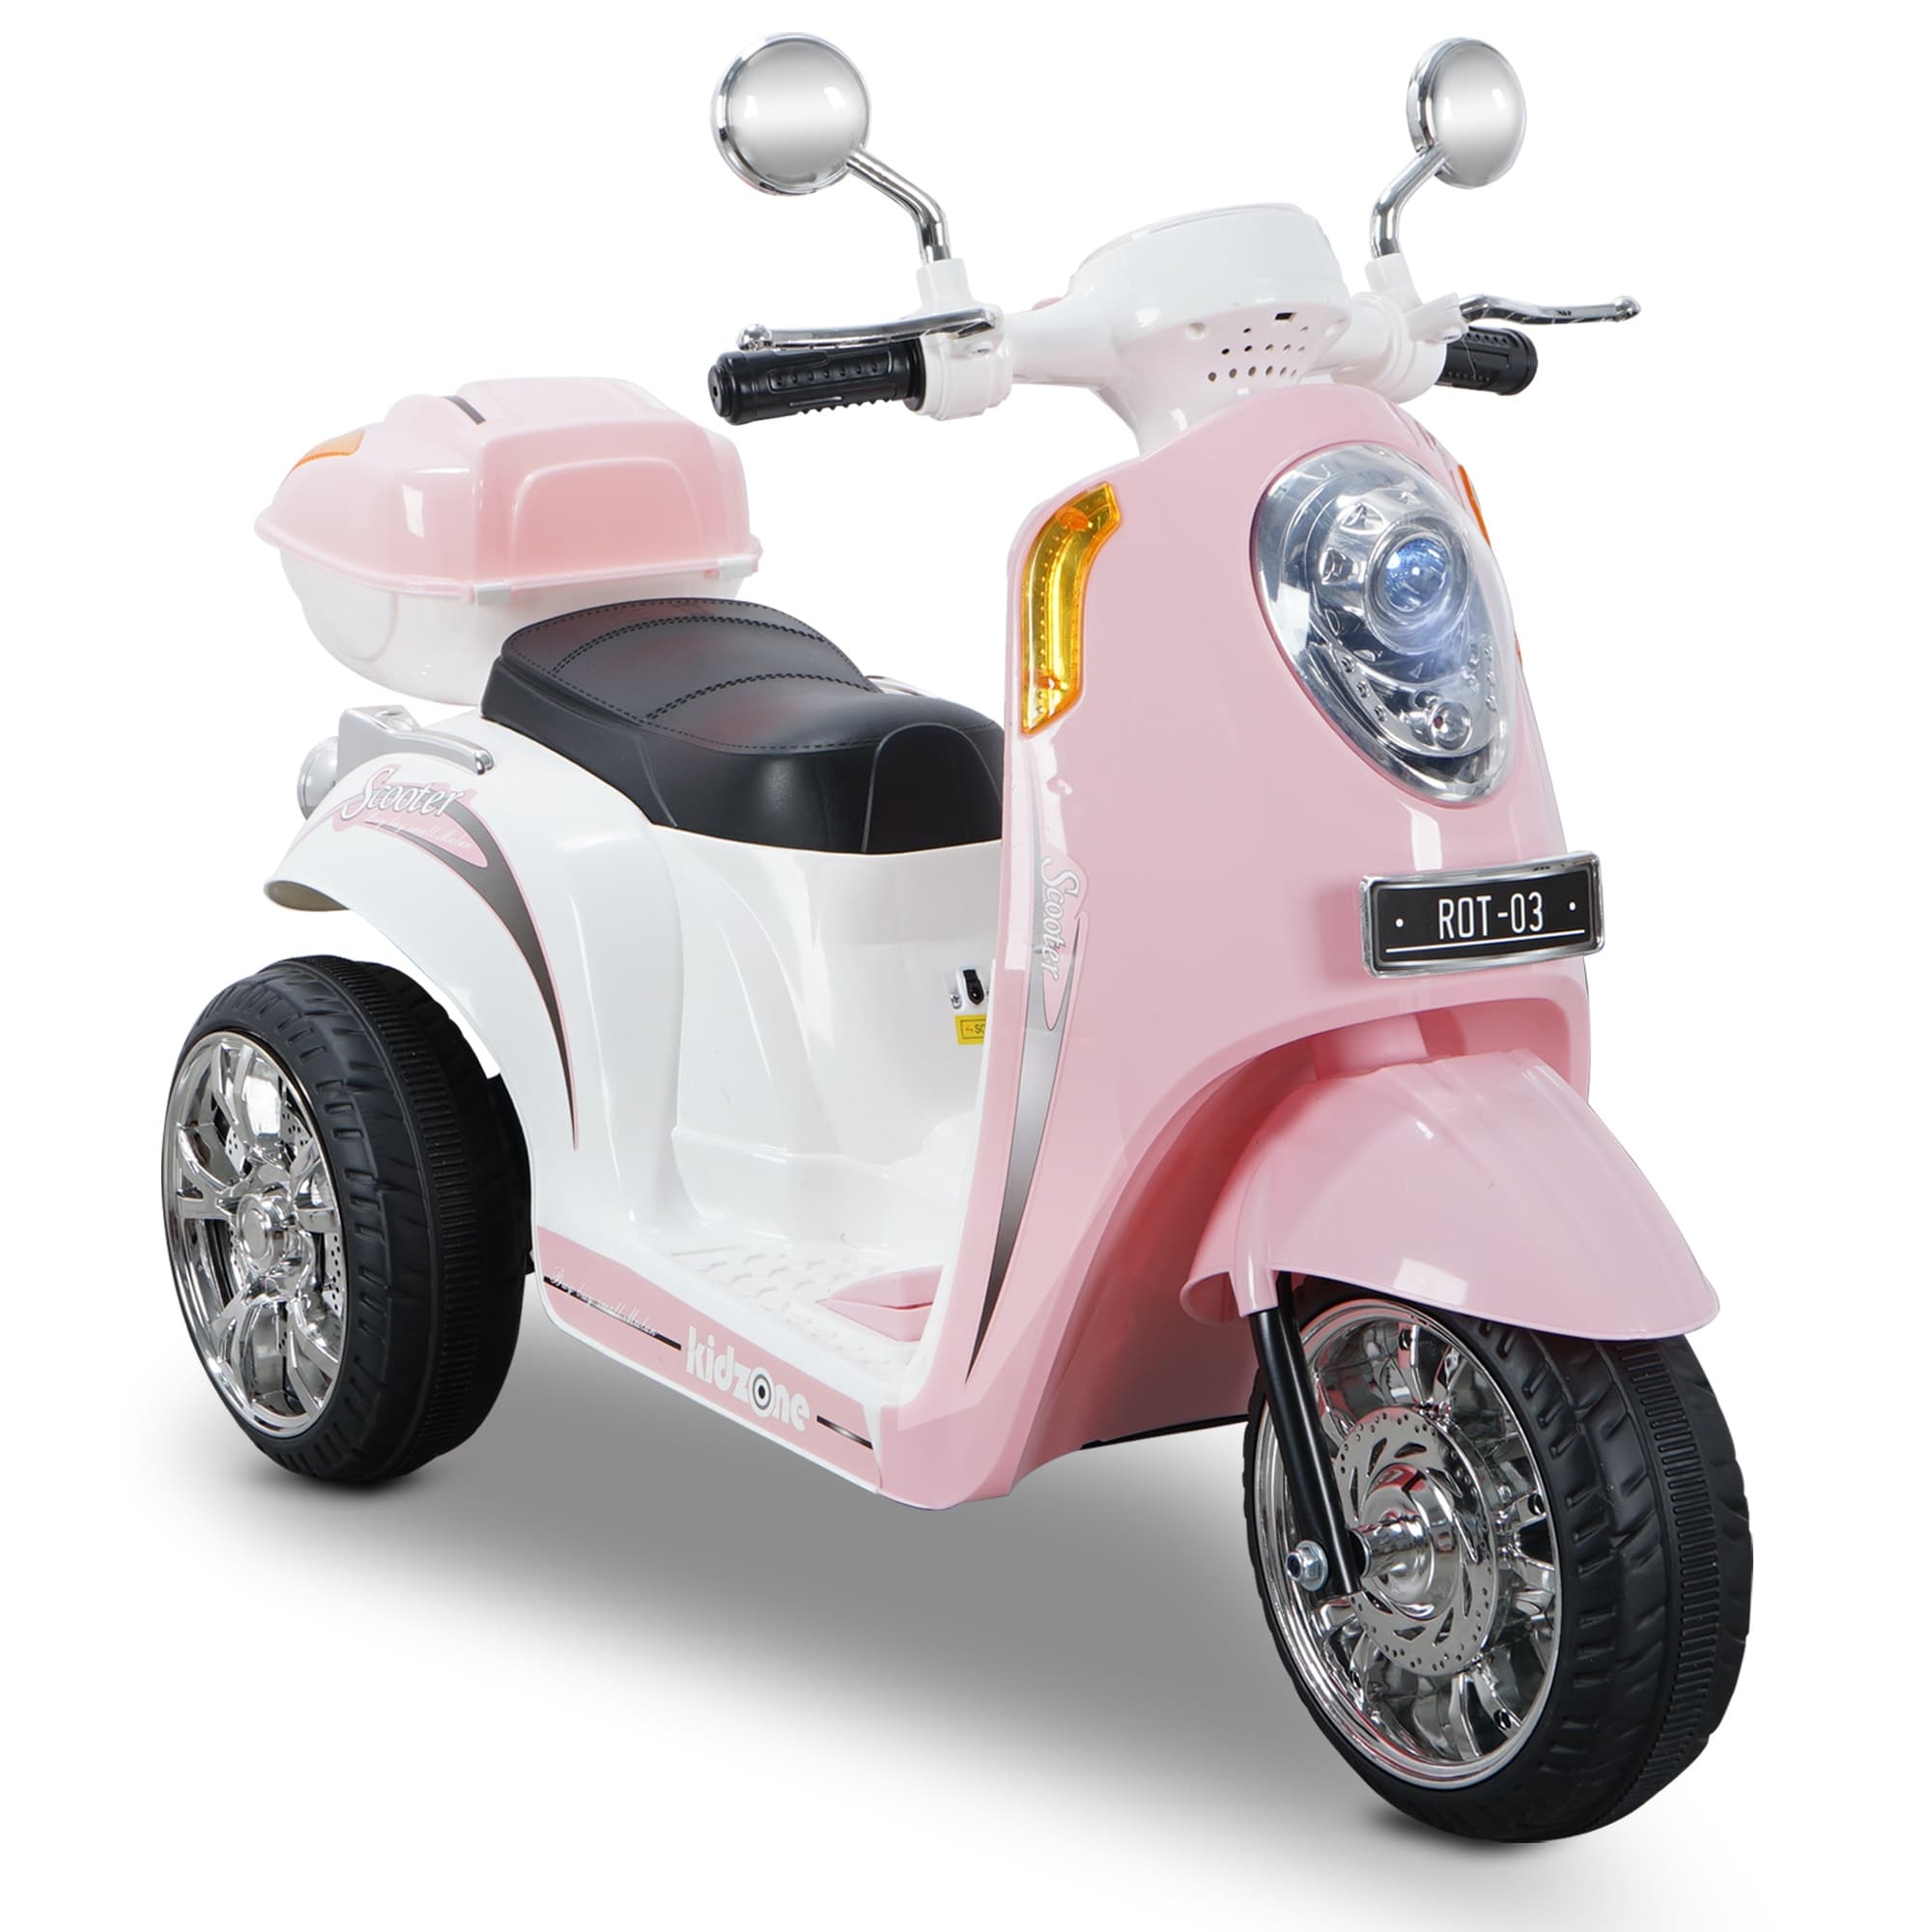 pink scooter for 2 year old